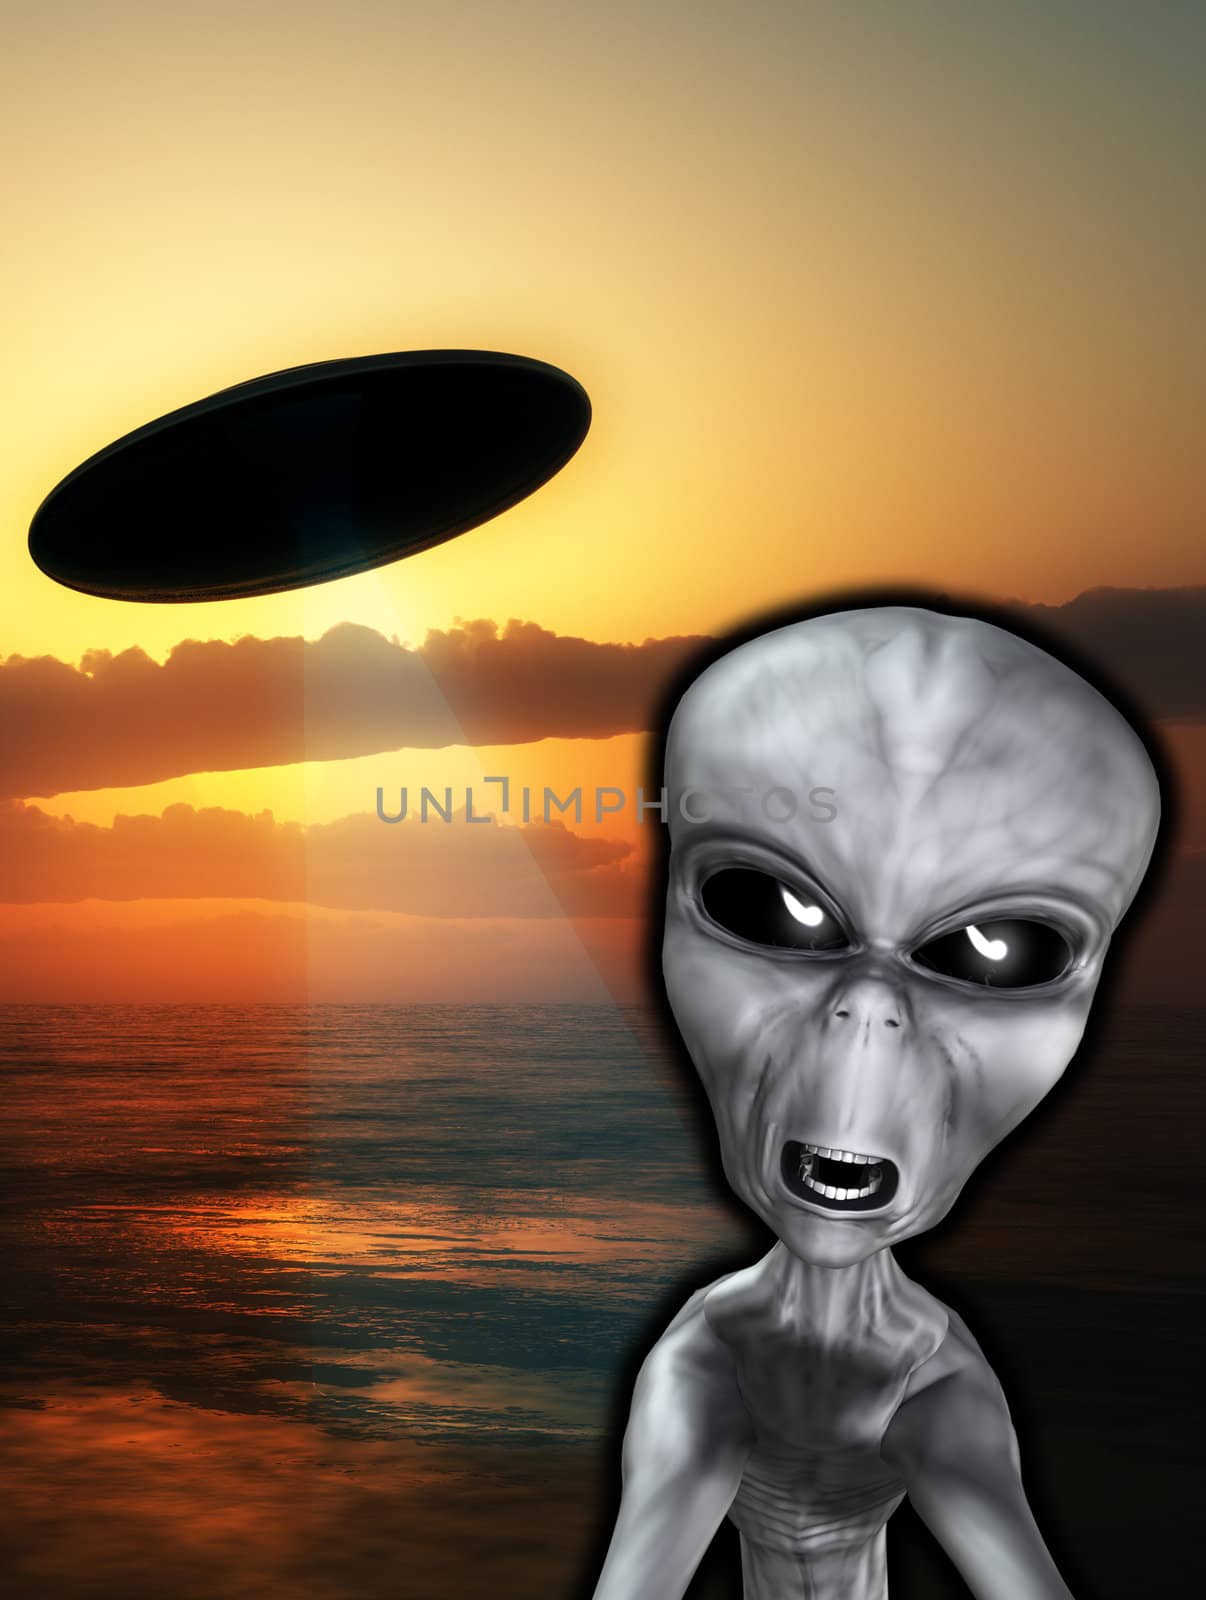 An angry looking alien with a UFO in the background.